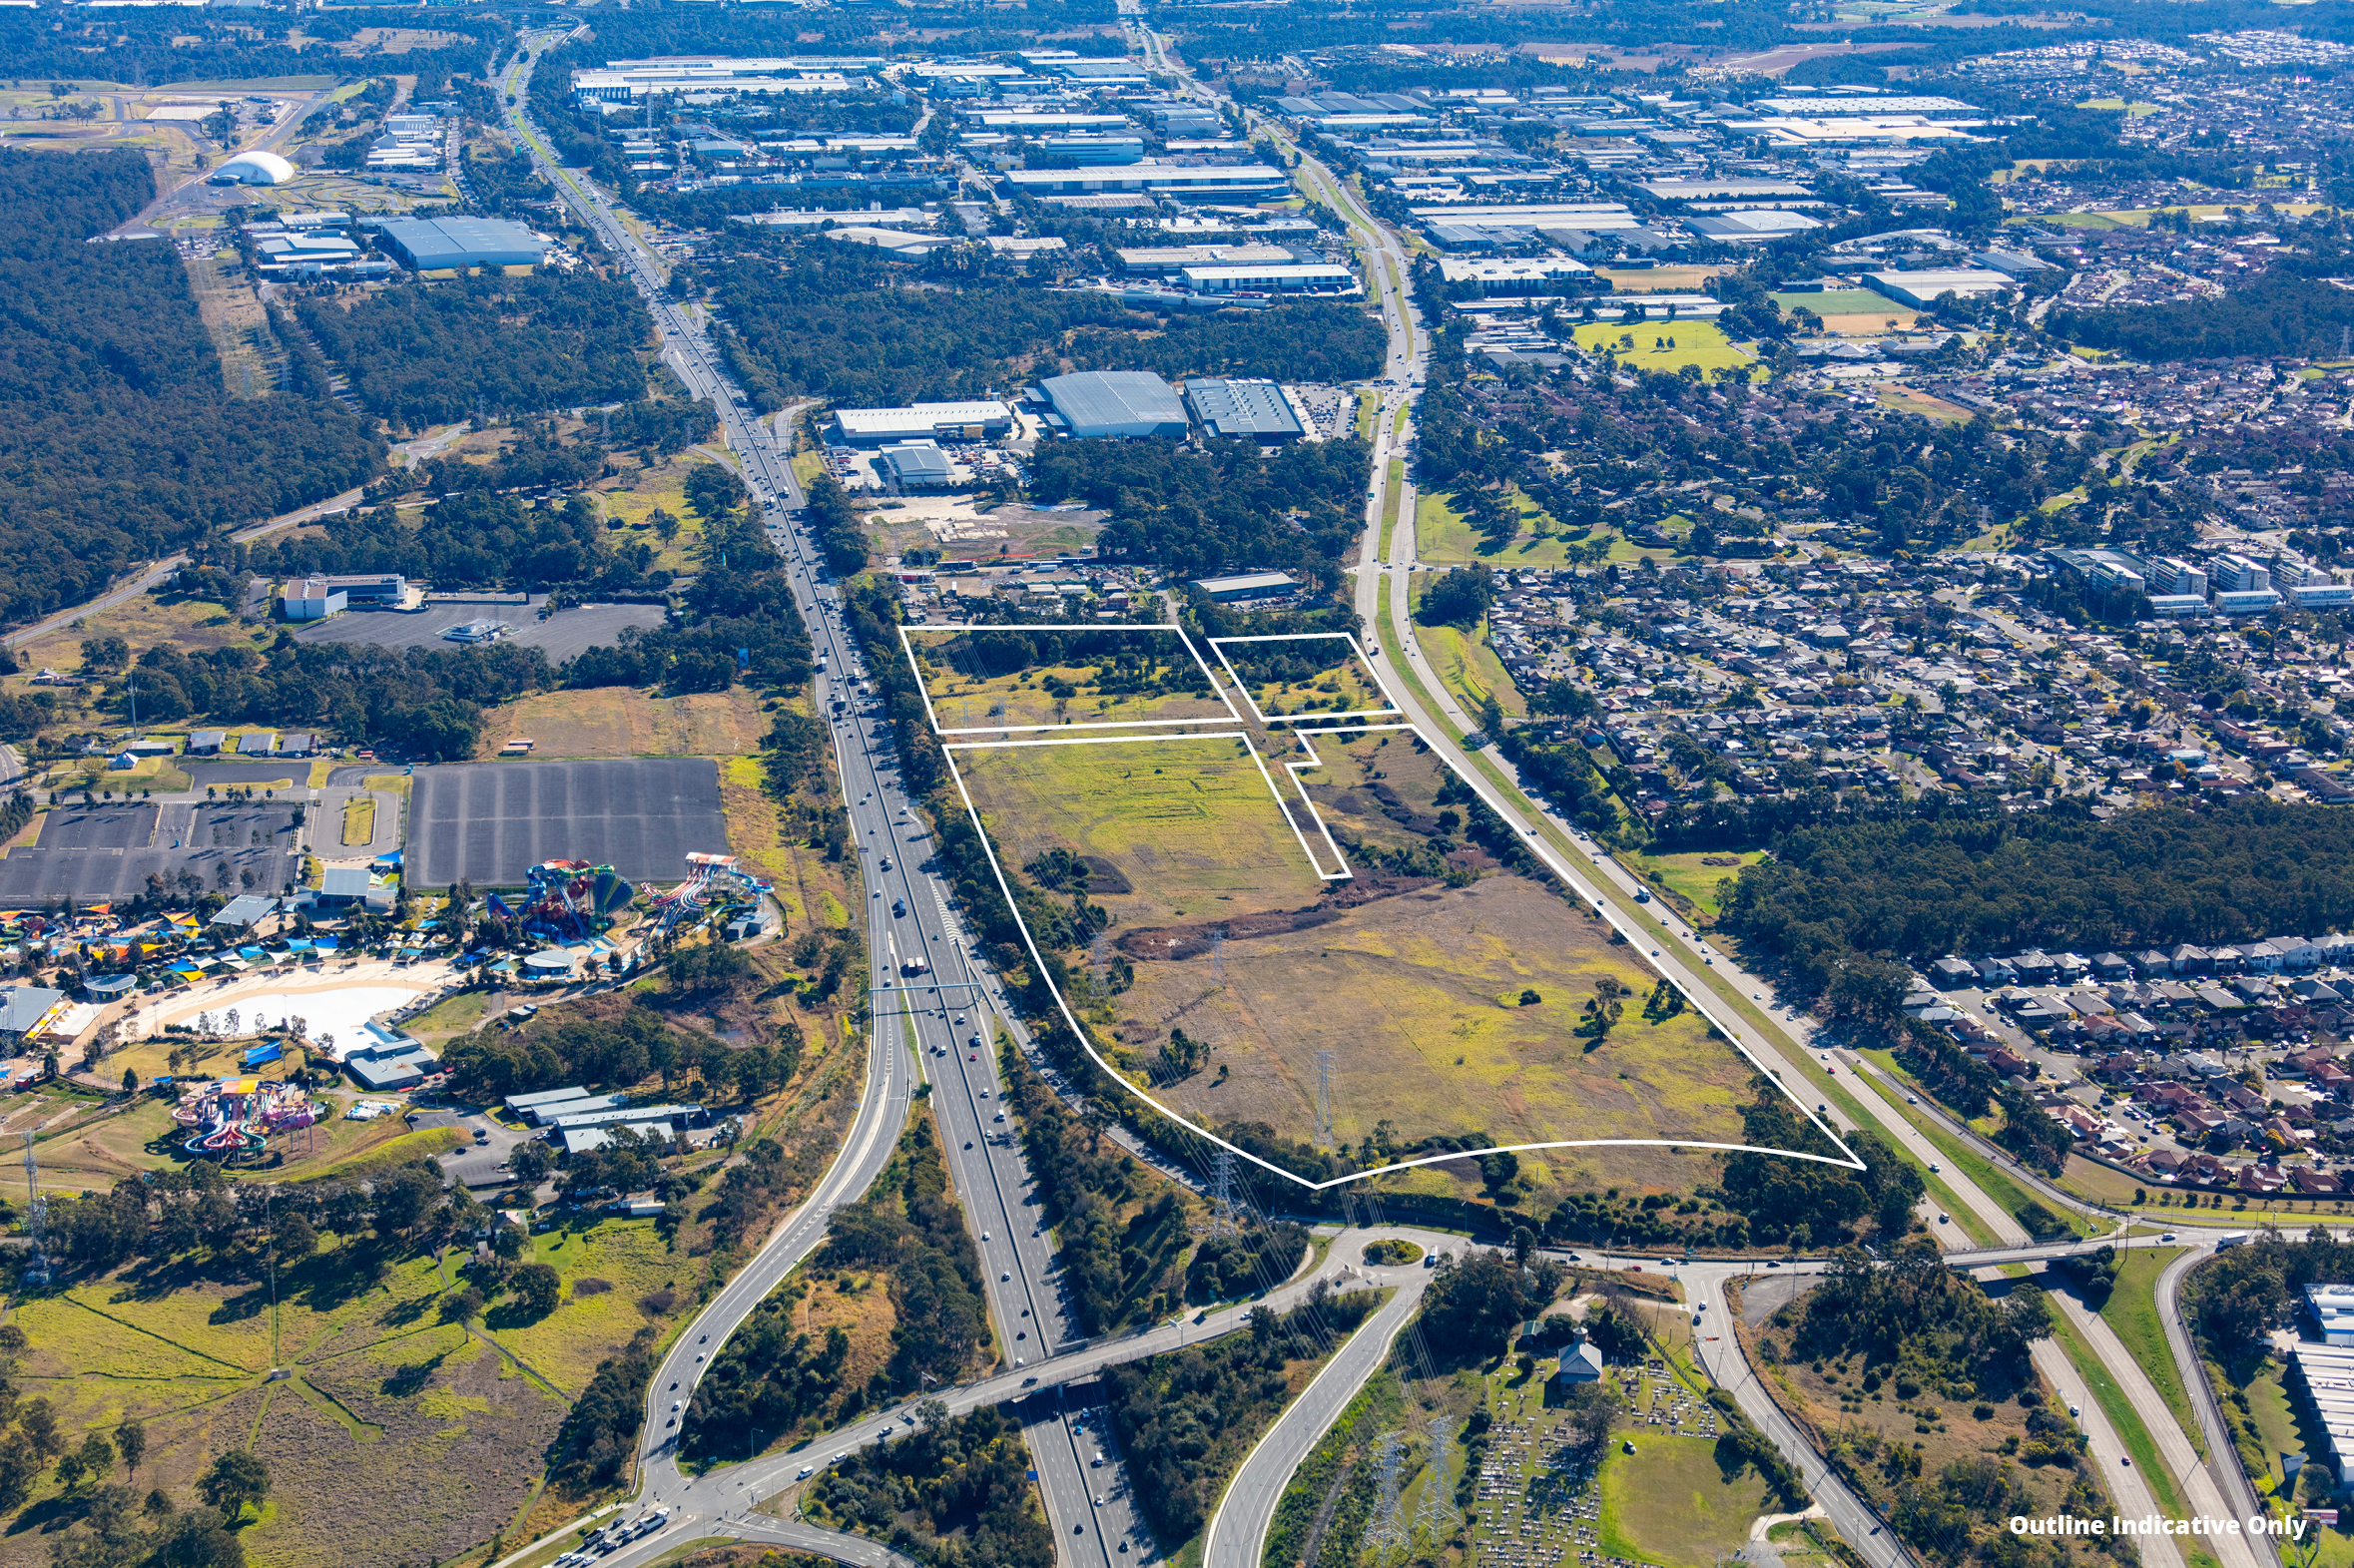 Over 21-hectares of prime industrial land within one of Sydney’s strongest industrial & logistics precincts